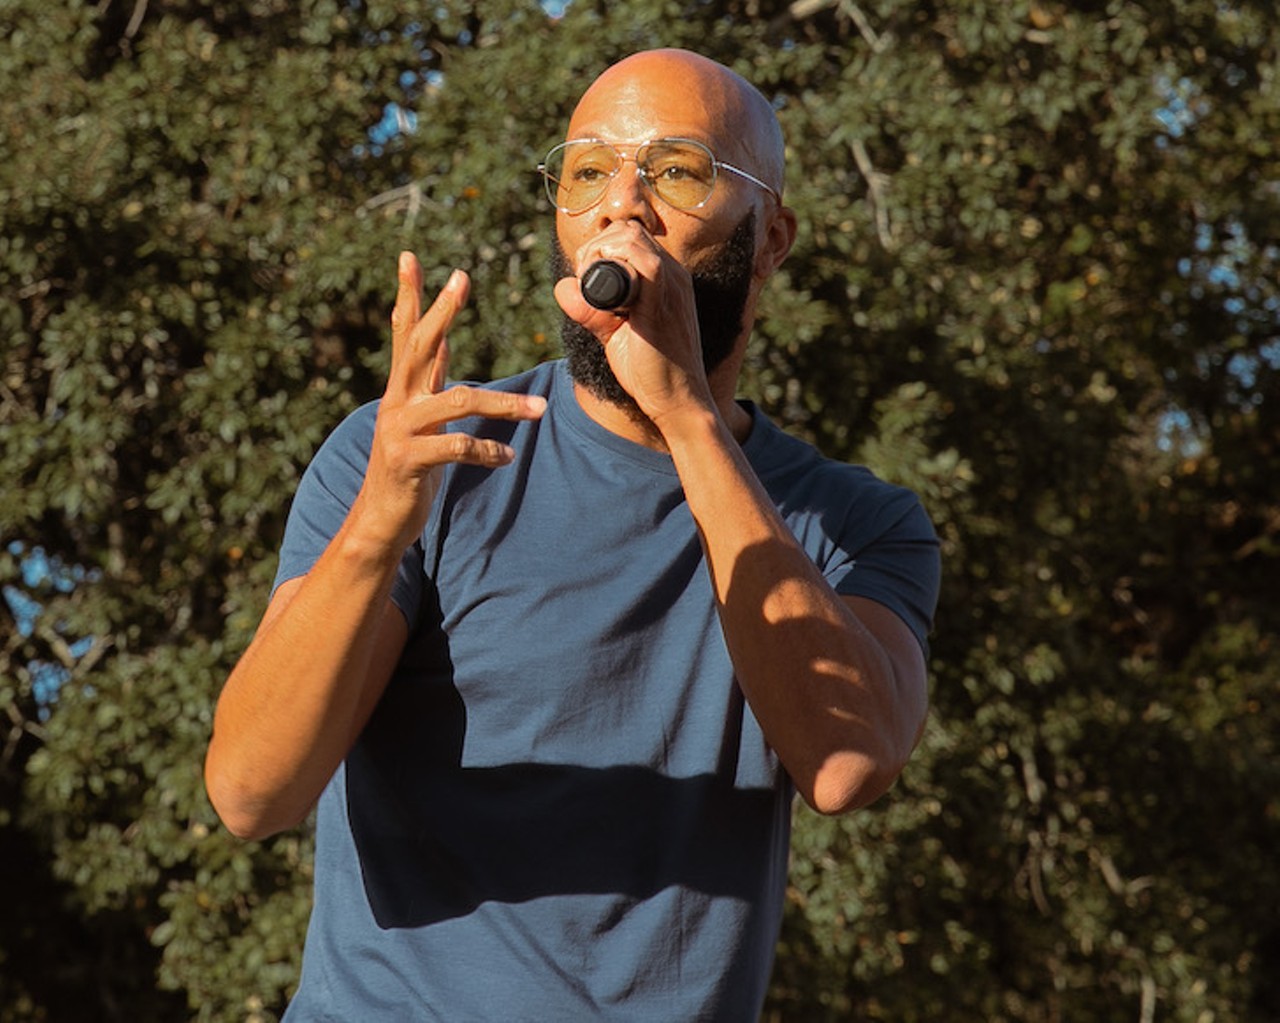 Rapper Common knocks on doors, performs for Tampa volunteers on final day of campaigning